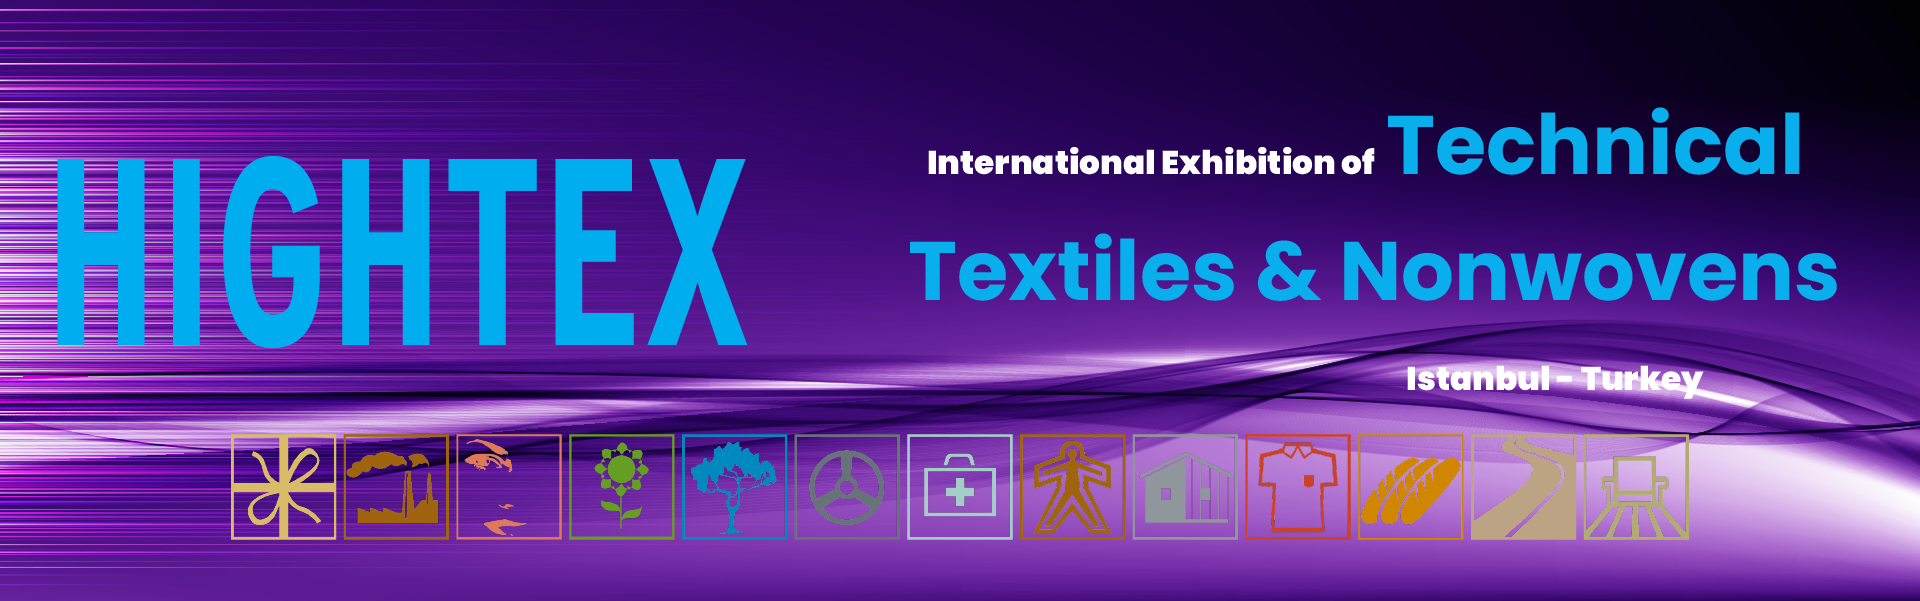 Technical Textiles and Nonwovens Exhibition Turkey Istanbul